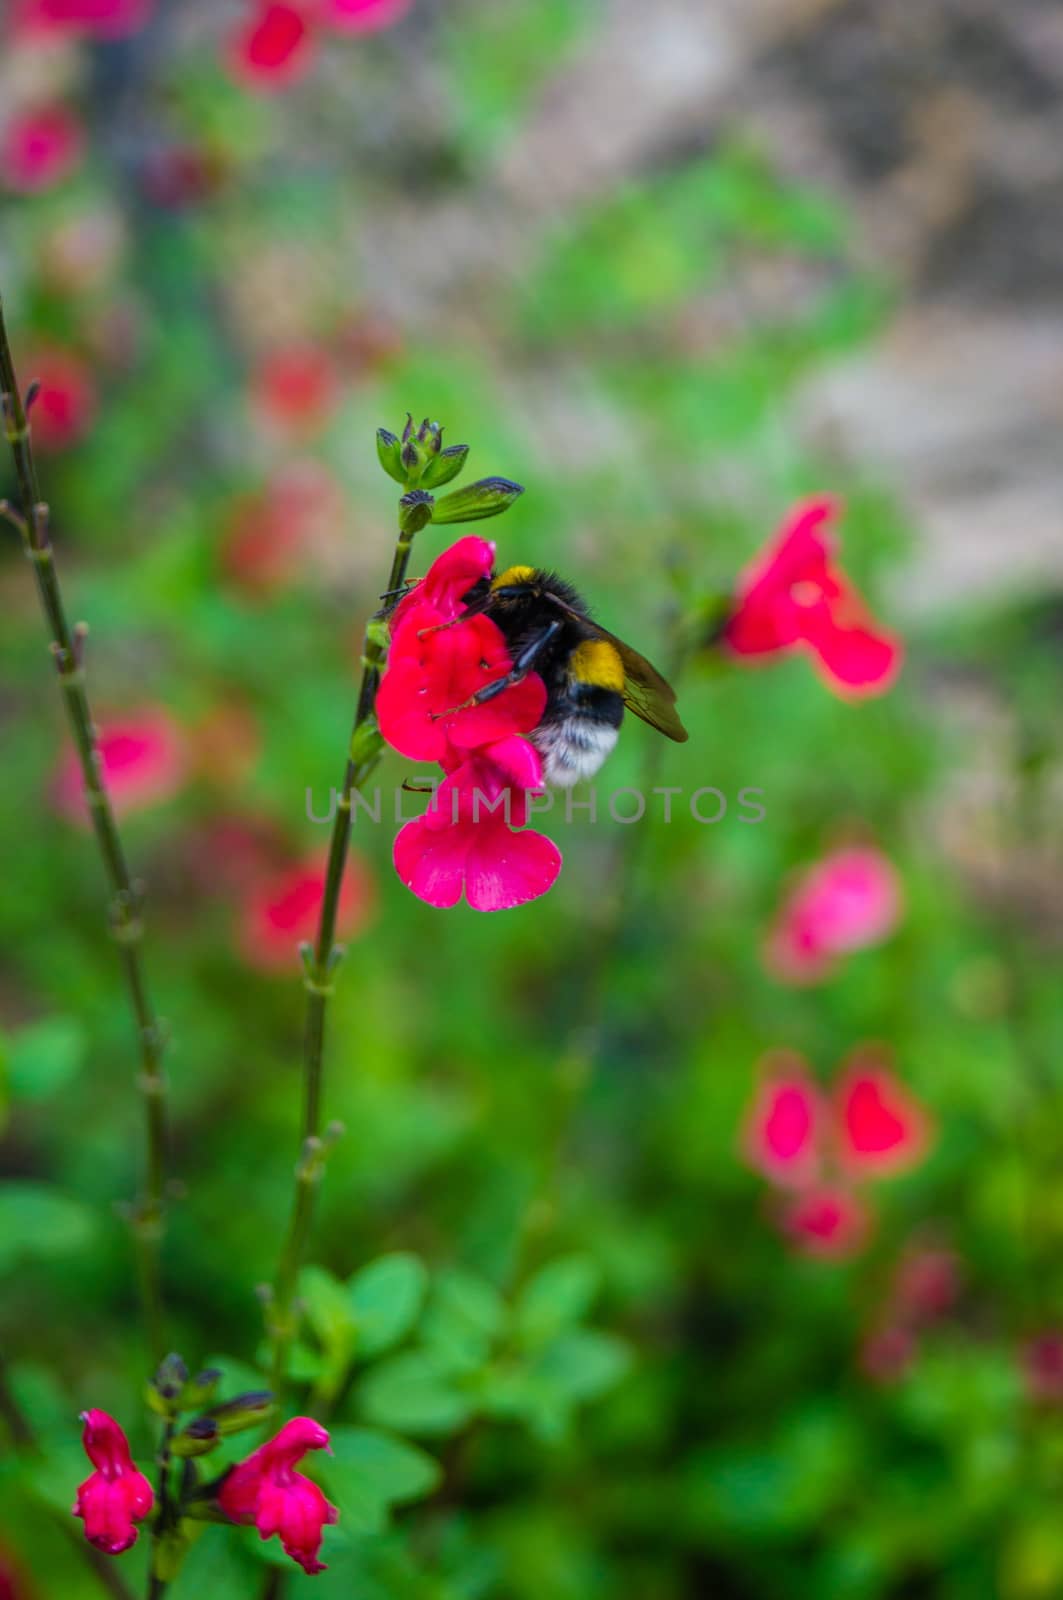 Bumblebee on a red flower by bignoub